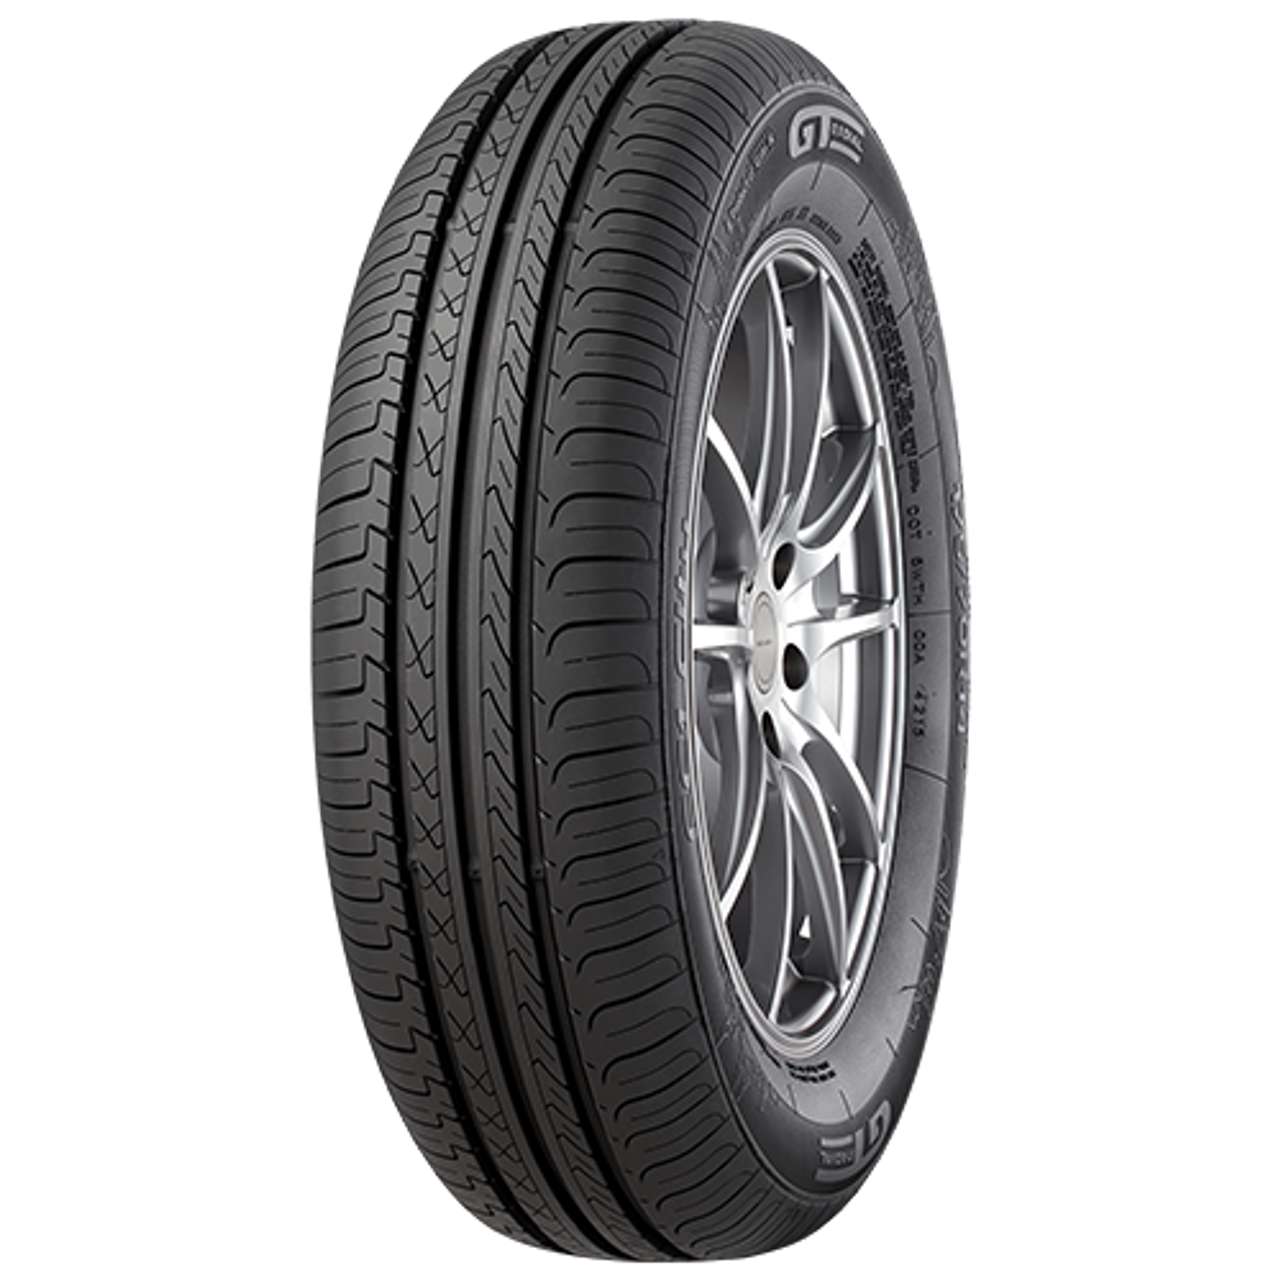 GT-RADIAL FE1 CITY 155/65R14 79T BSW